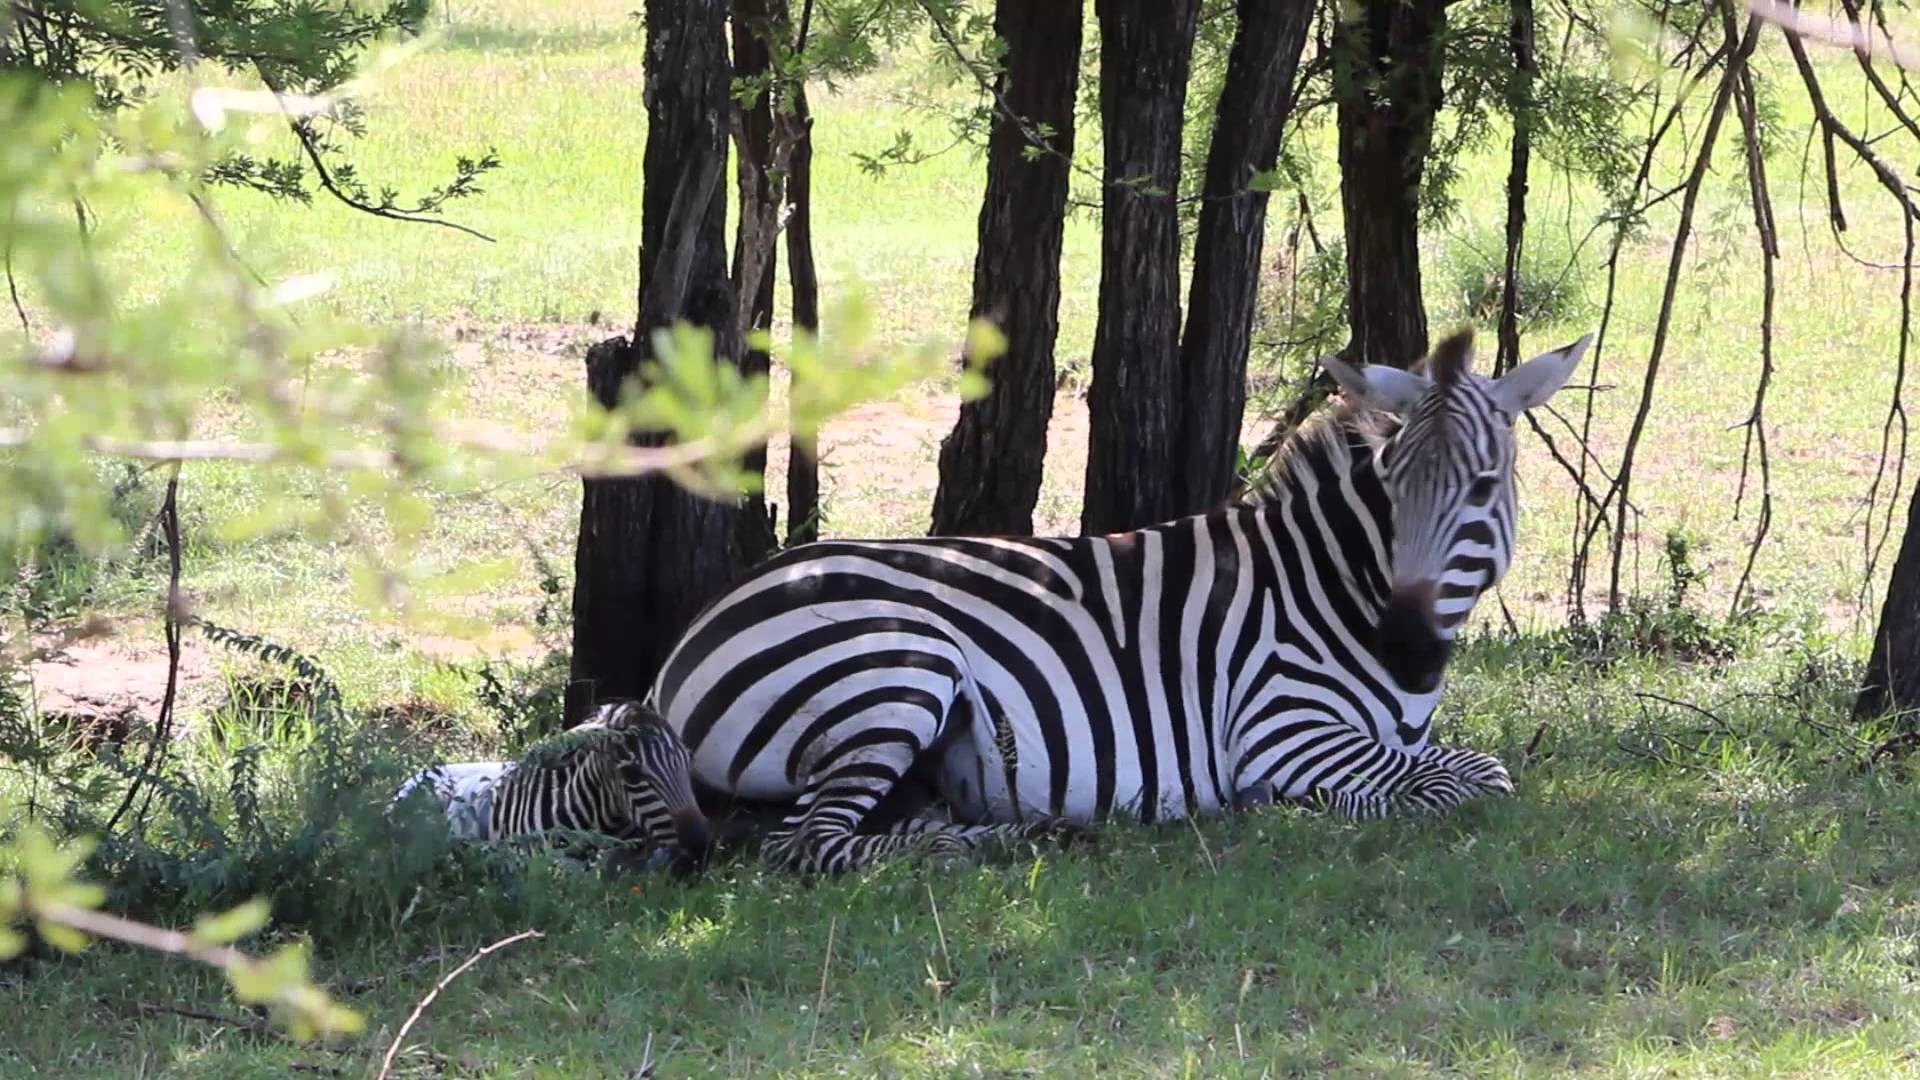 Zebra being born and then trying to walk